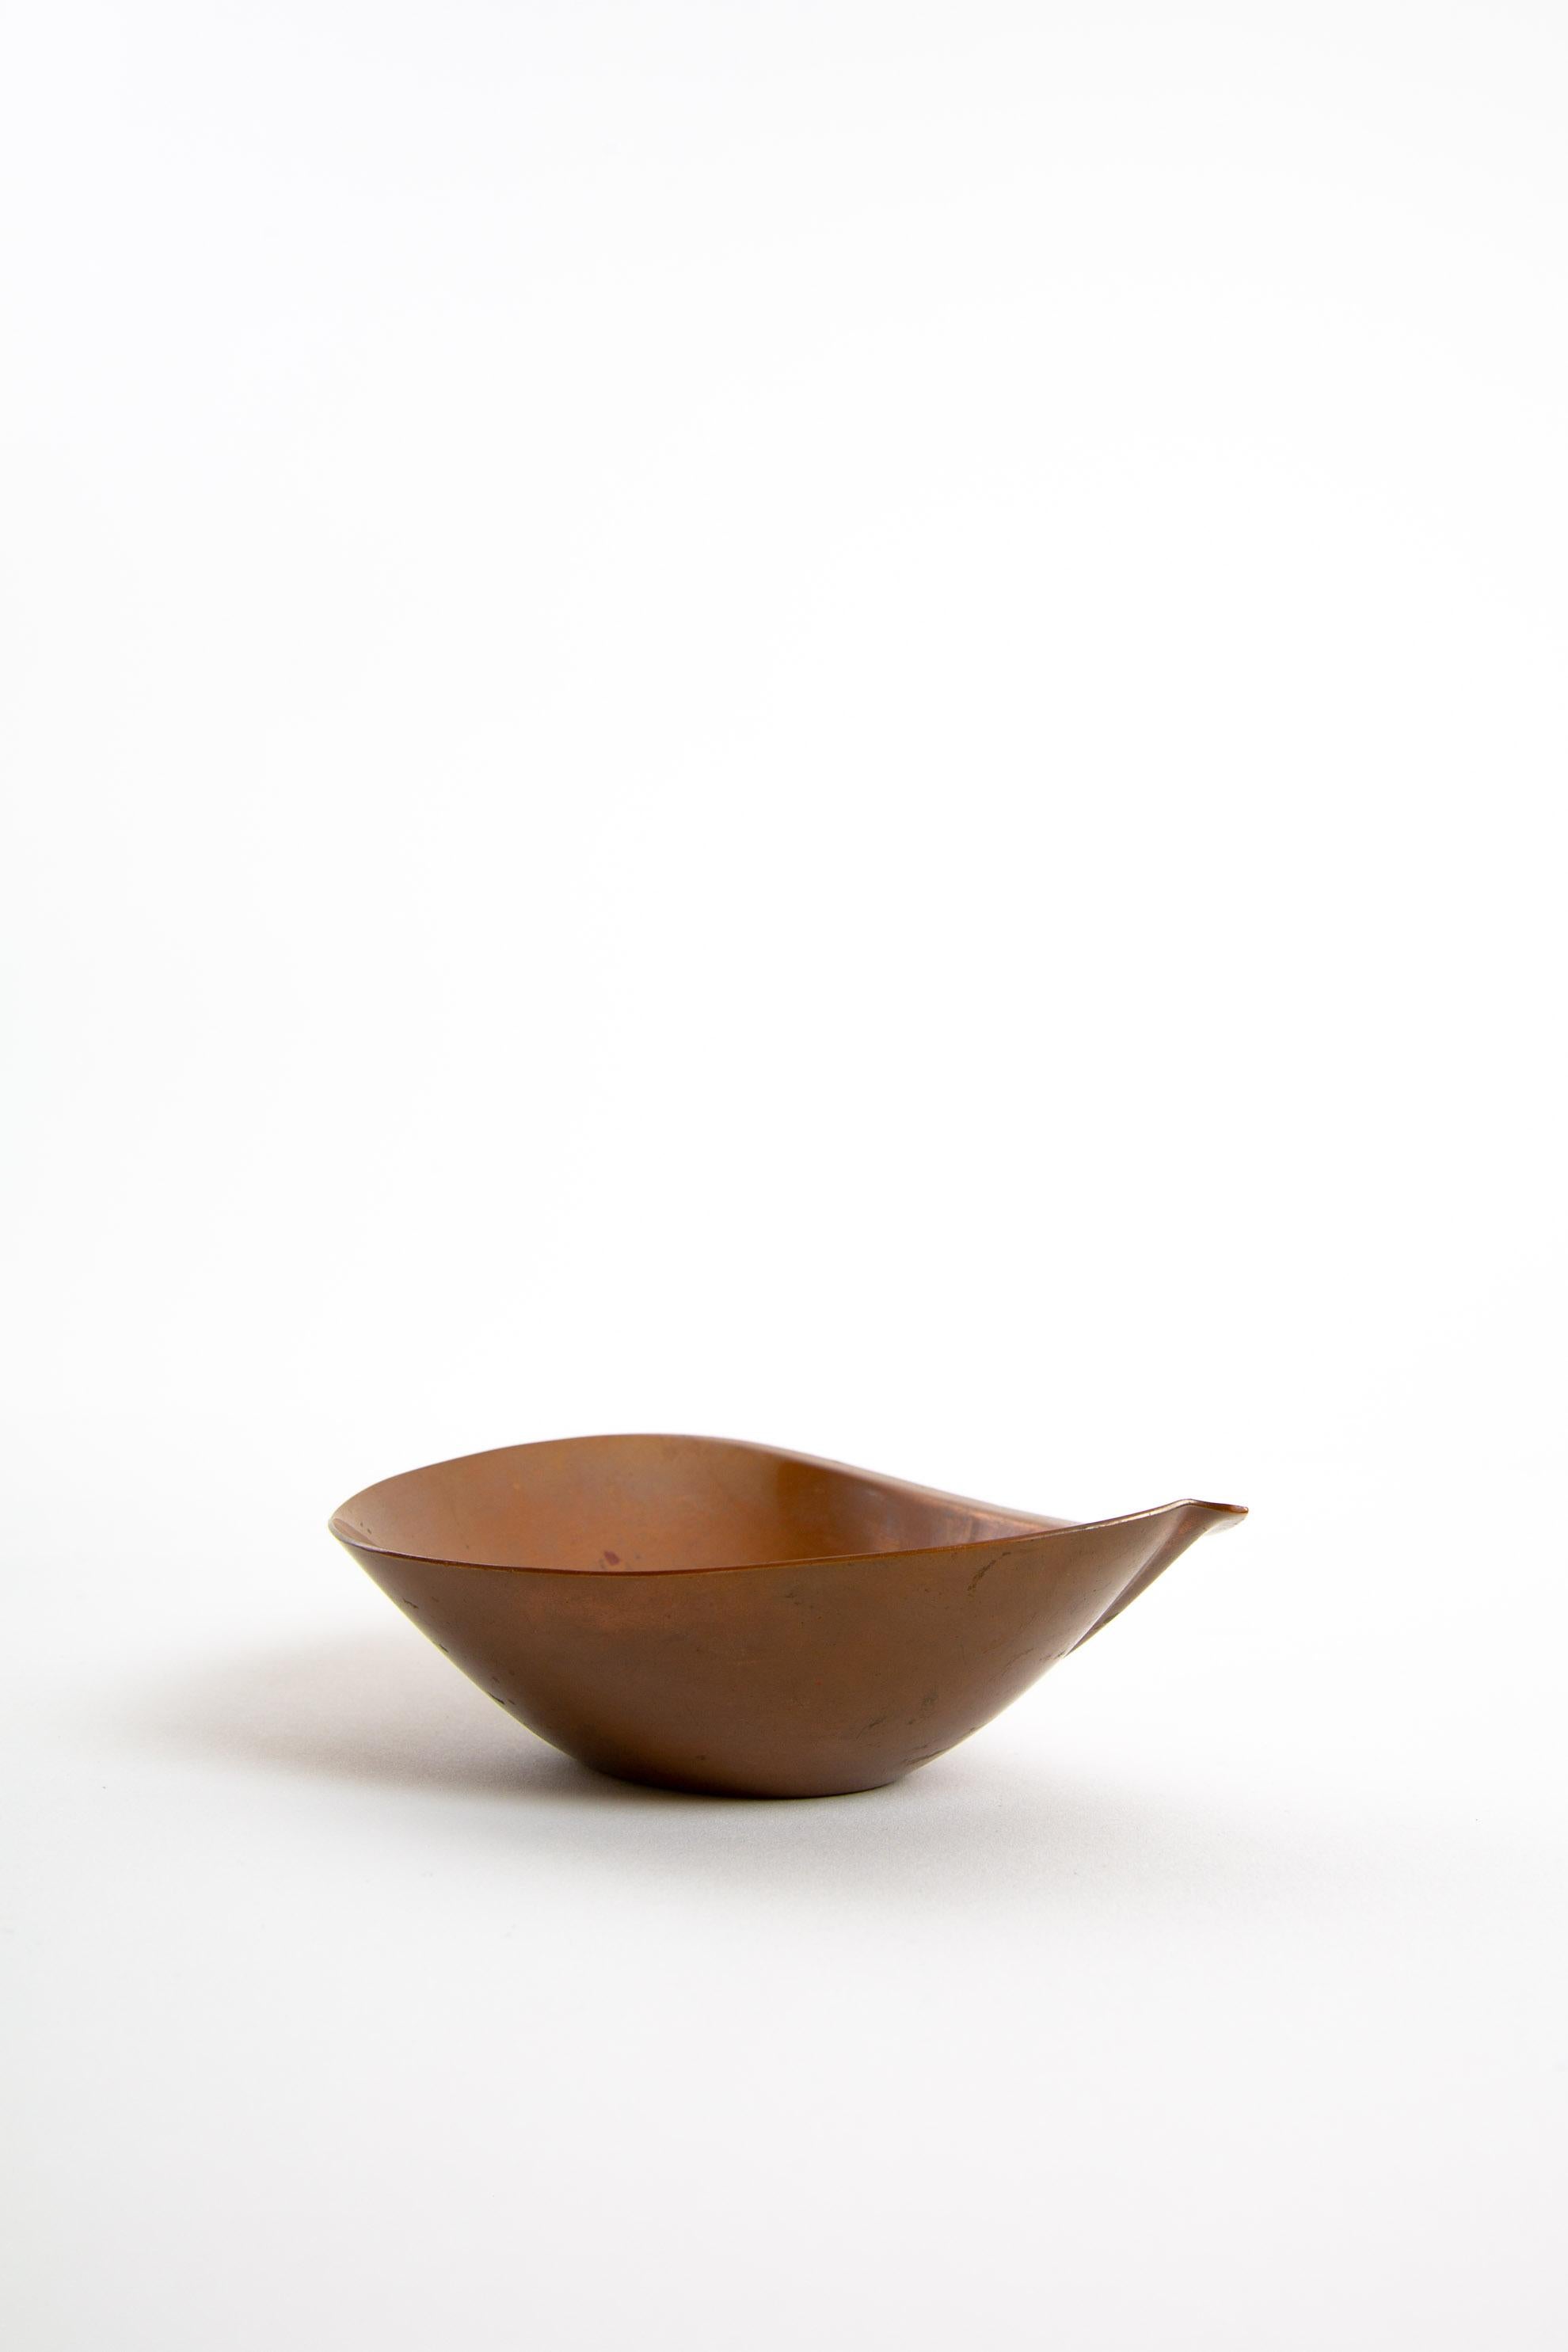 Tapio Wirkkala bronze bowl organic form by Kultakeskus Oy Finland. Swirling copper/bronze design. The bowl has been nice patinated by the years. Also ART DECO style. 

There are two bowls. They are identic, but one has a tree as mark and the name